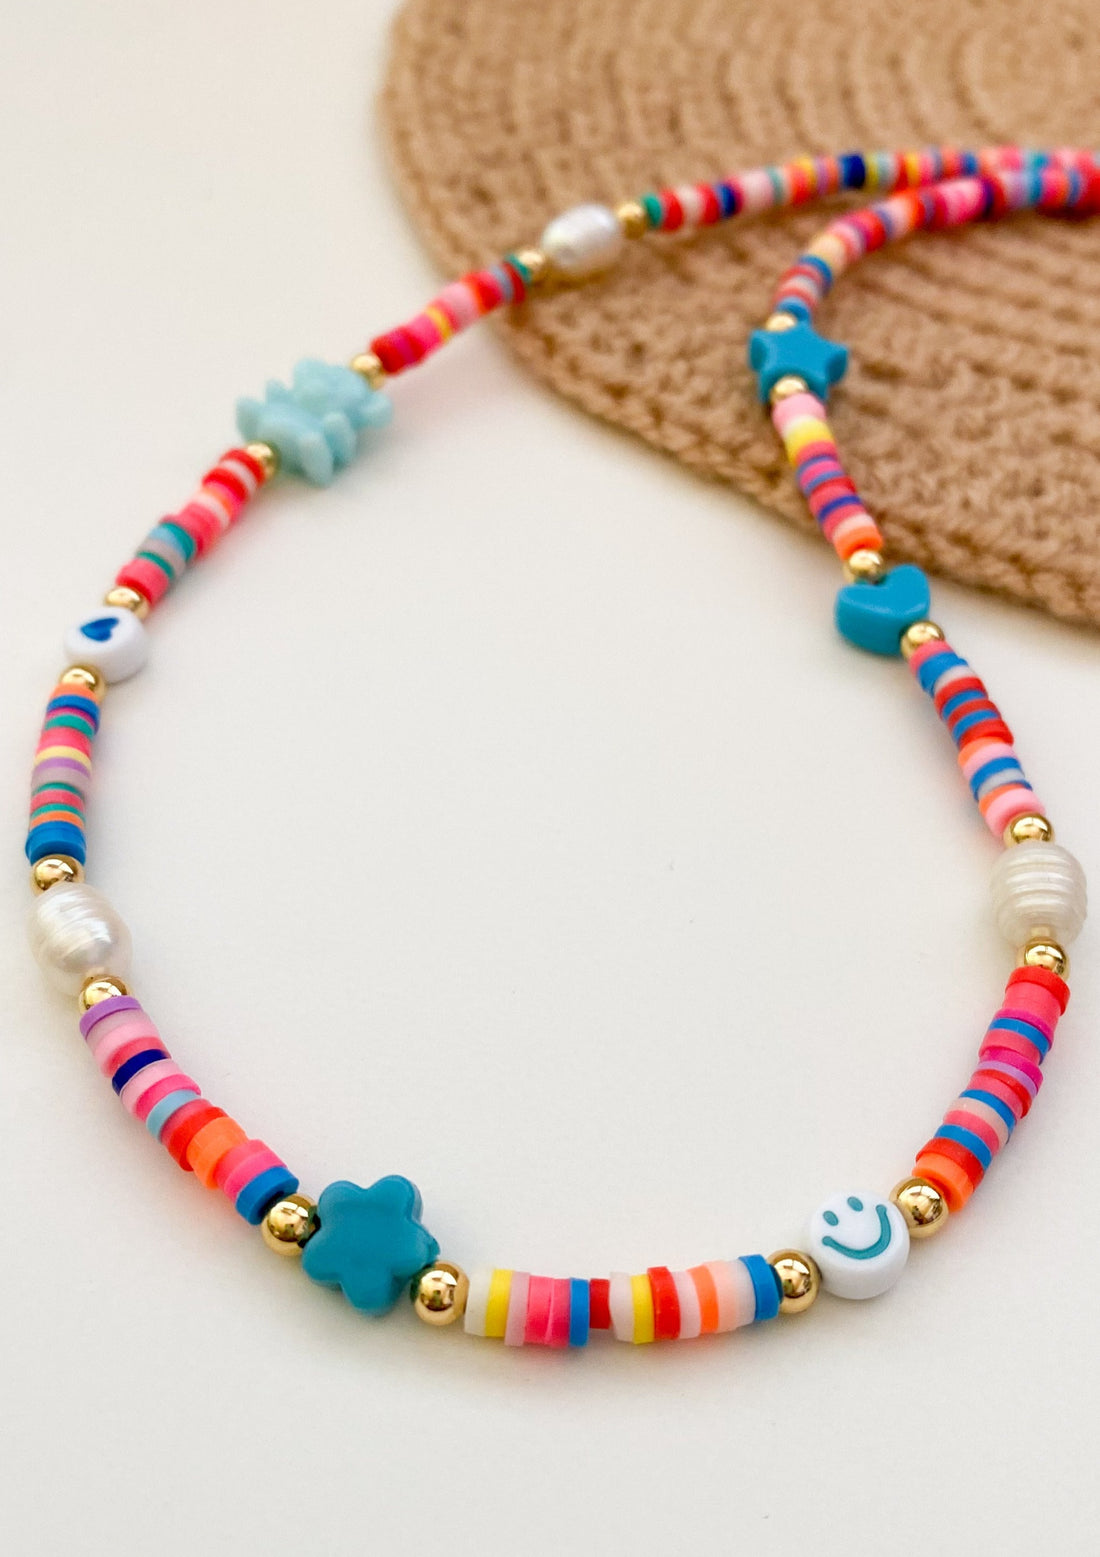 Happy Day Necklace